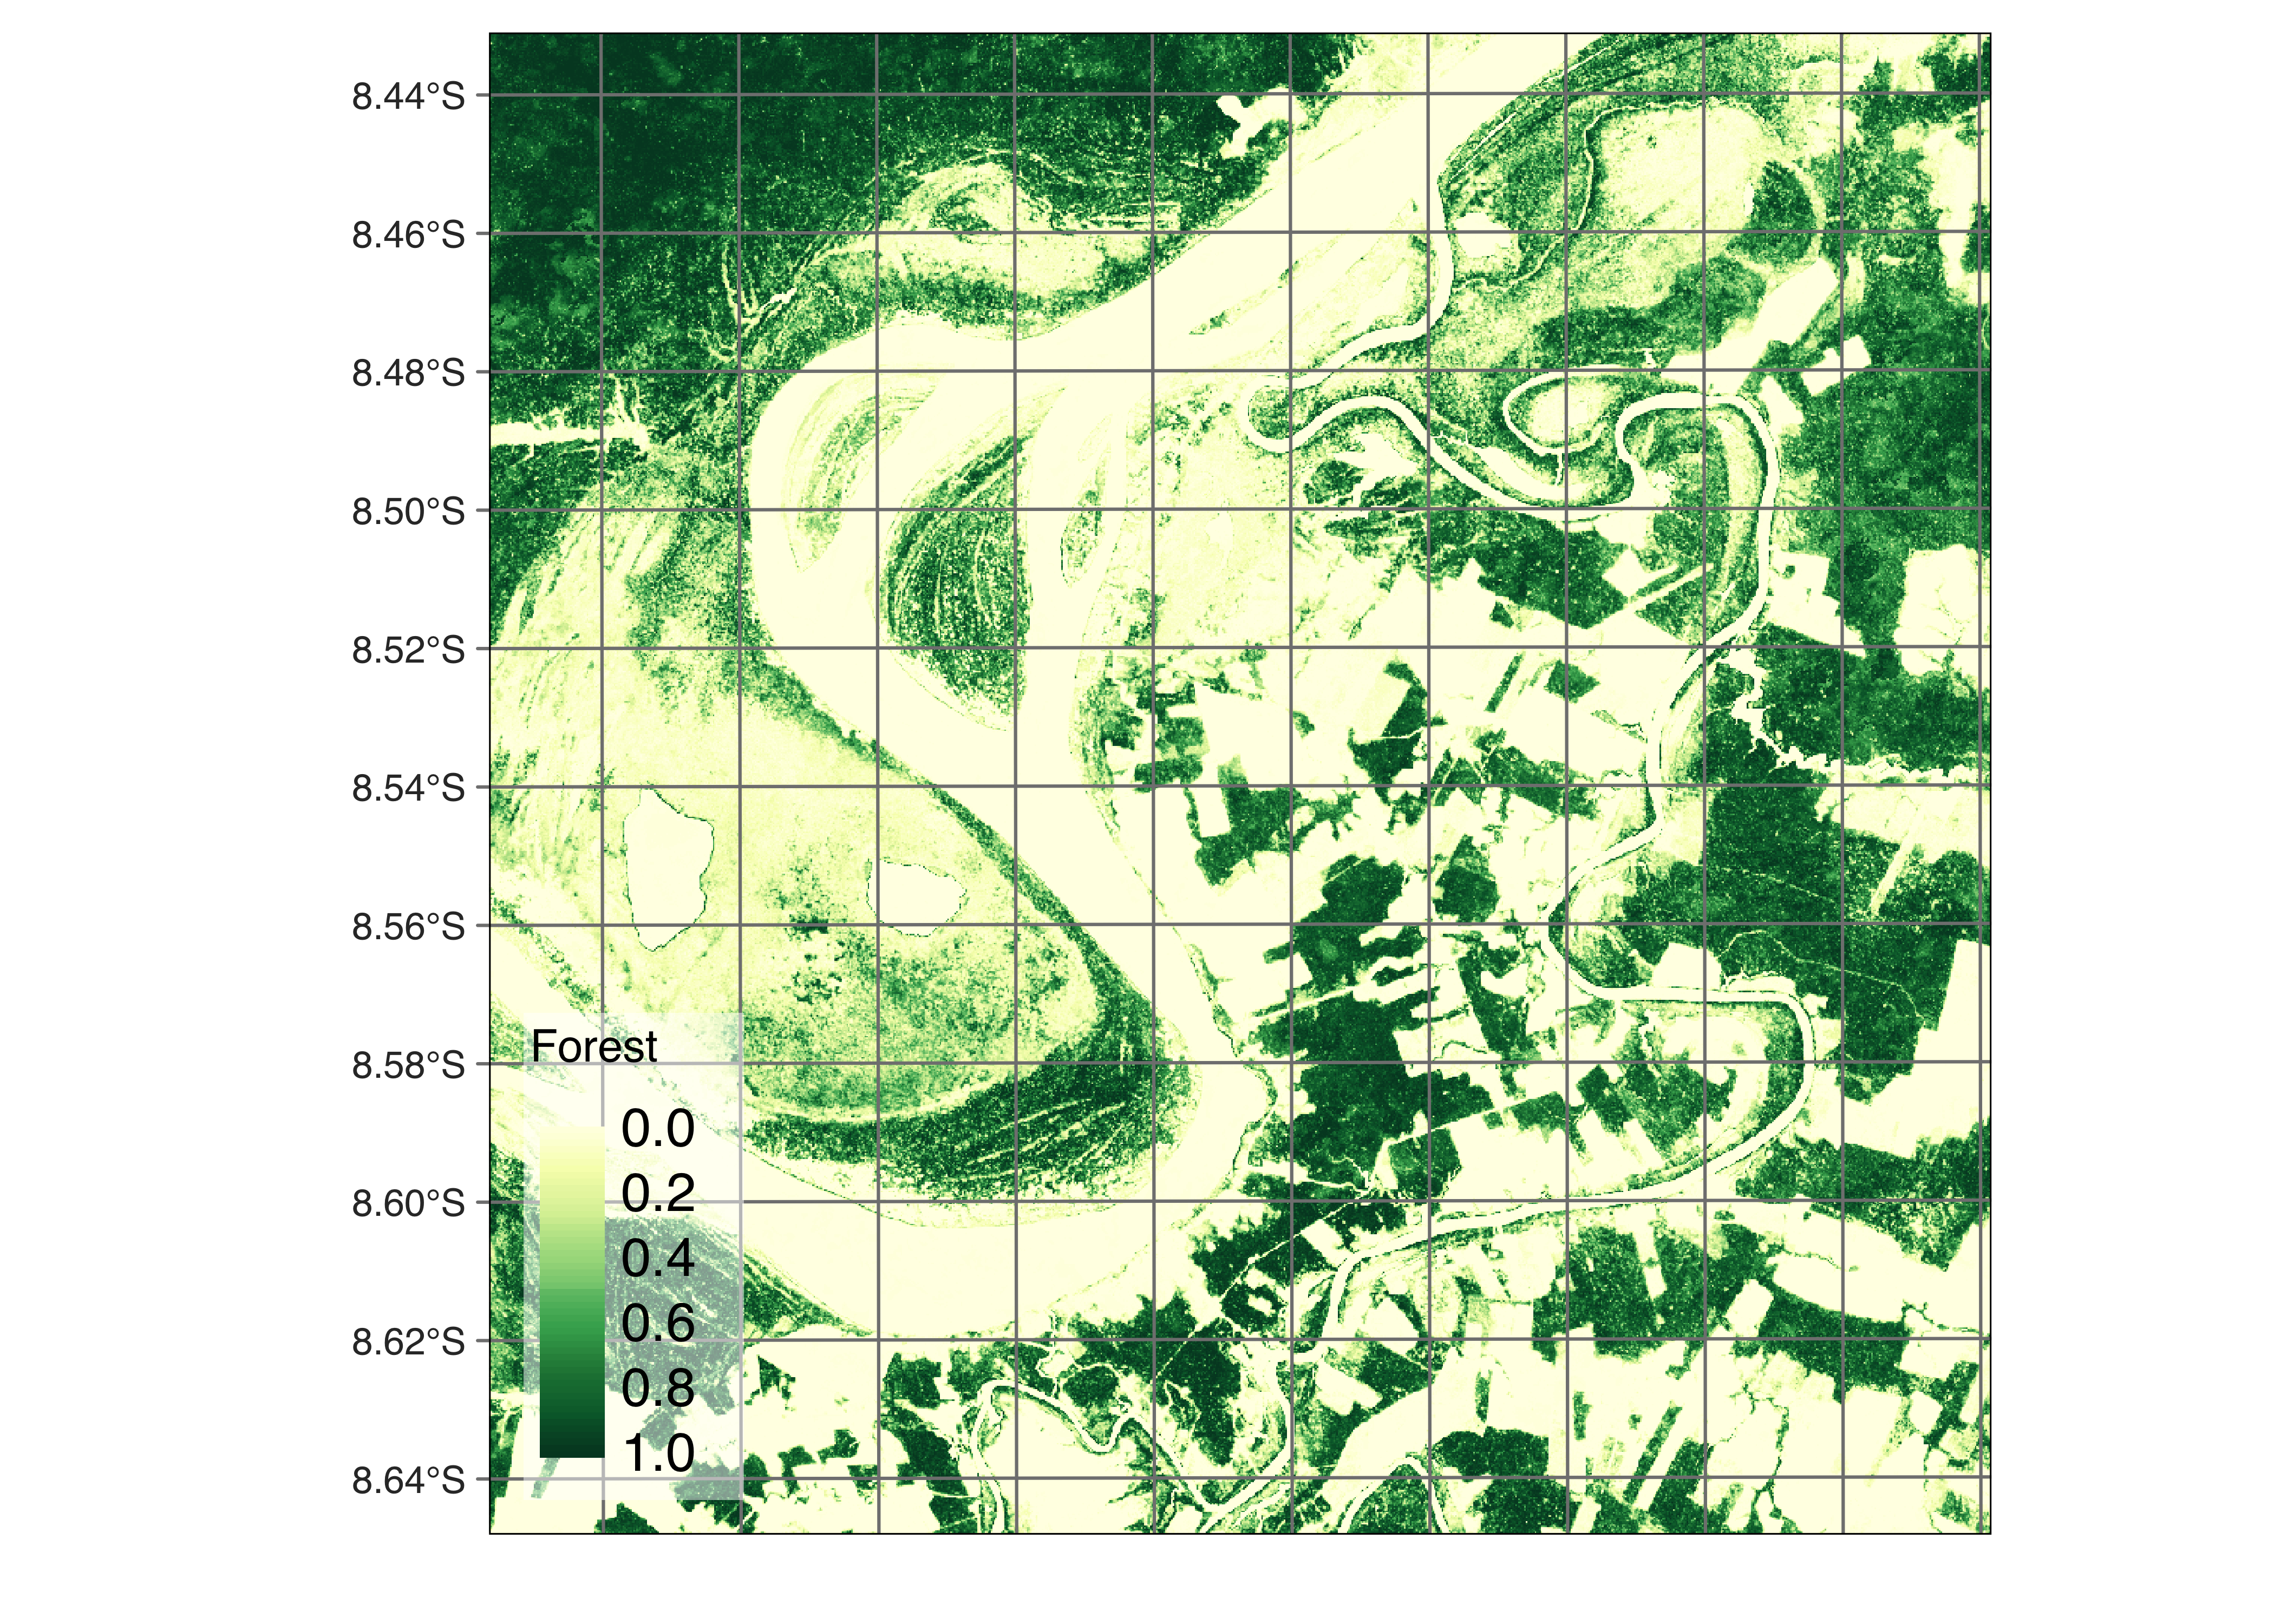 Final map of deforestation obtained using TempCNN model (Source: Authors).